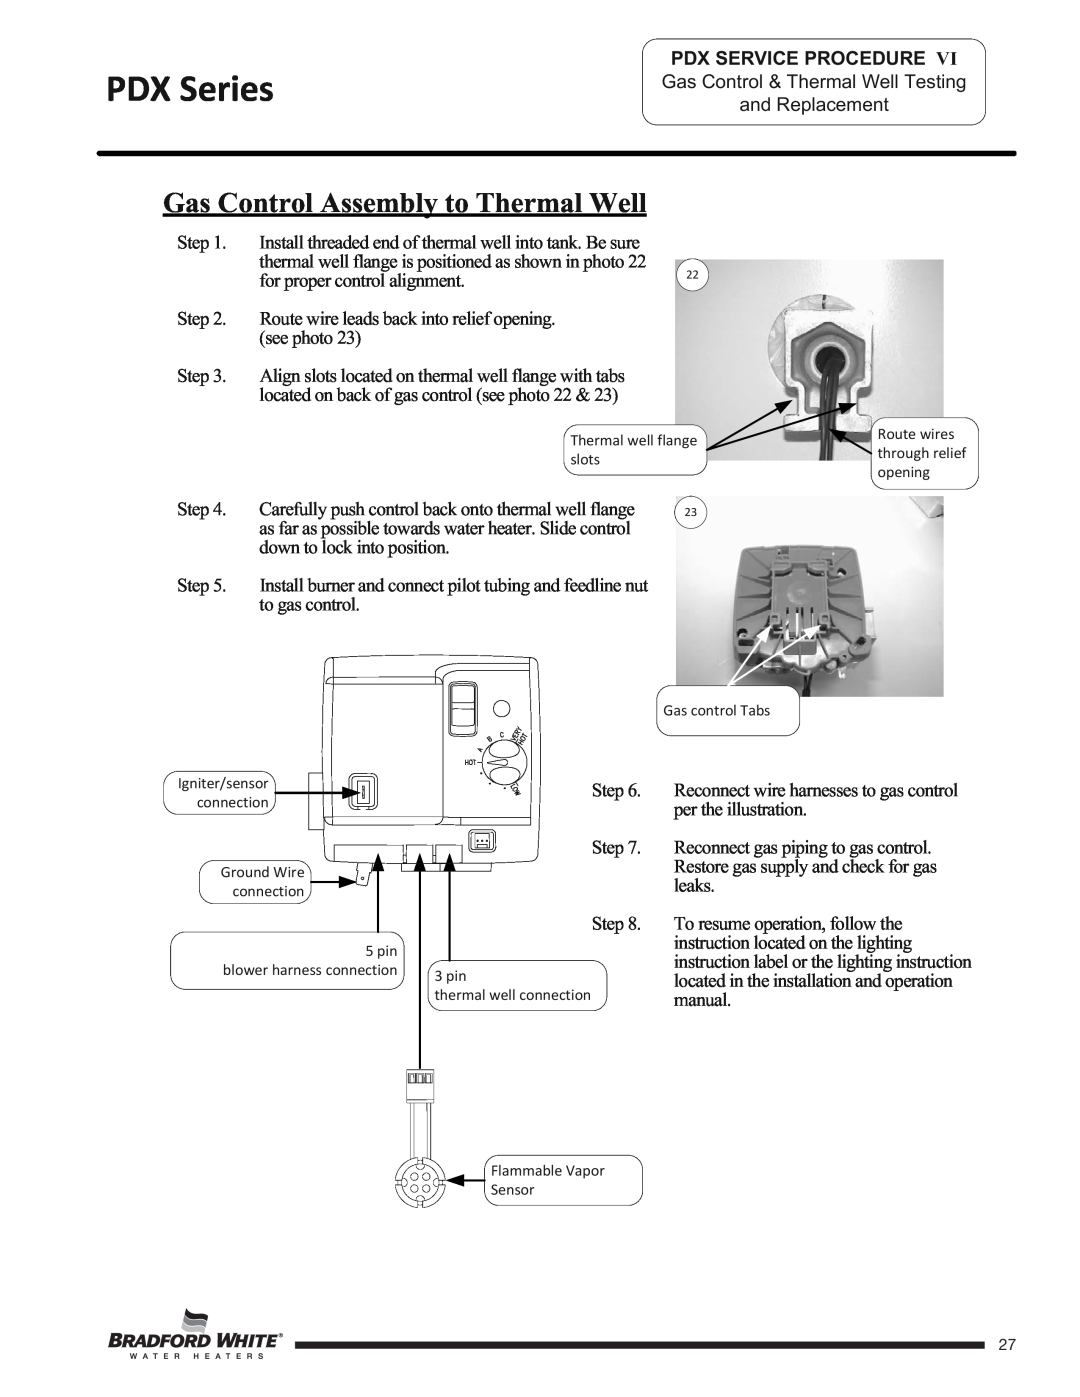 Honeywell PDX150S*F(BN,SX,CX), PDX450S*F(BN,SX) Gas Control Assembly to Thermal Well, PDX Series, Pdx Service Procedure 